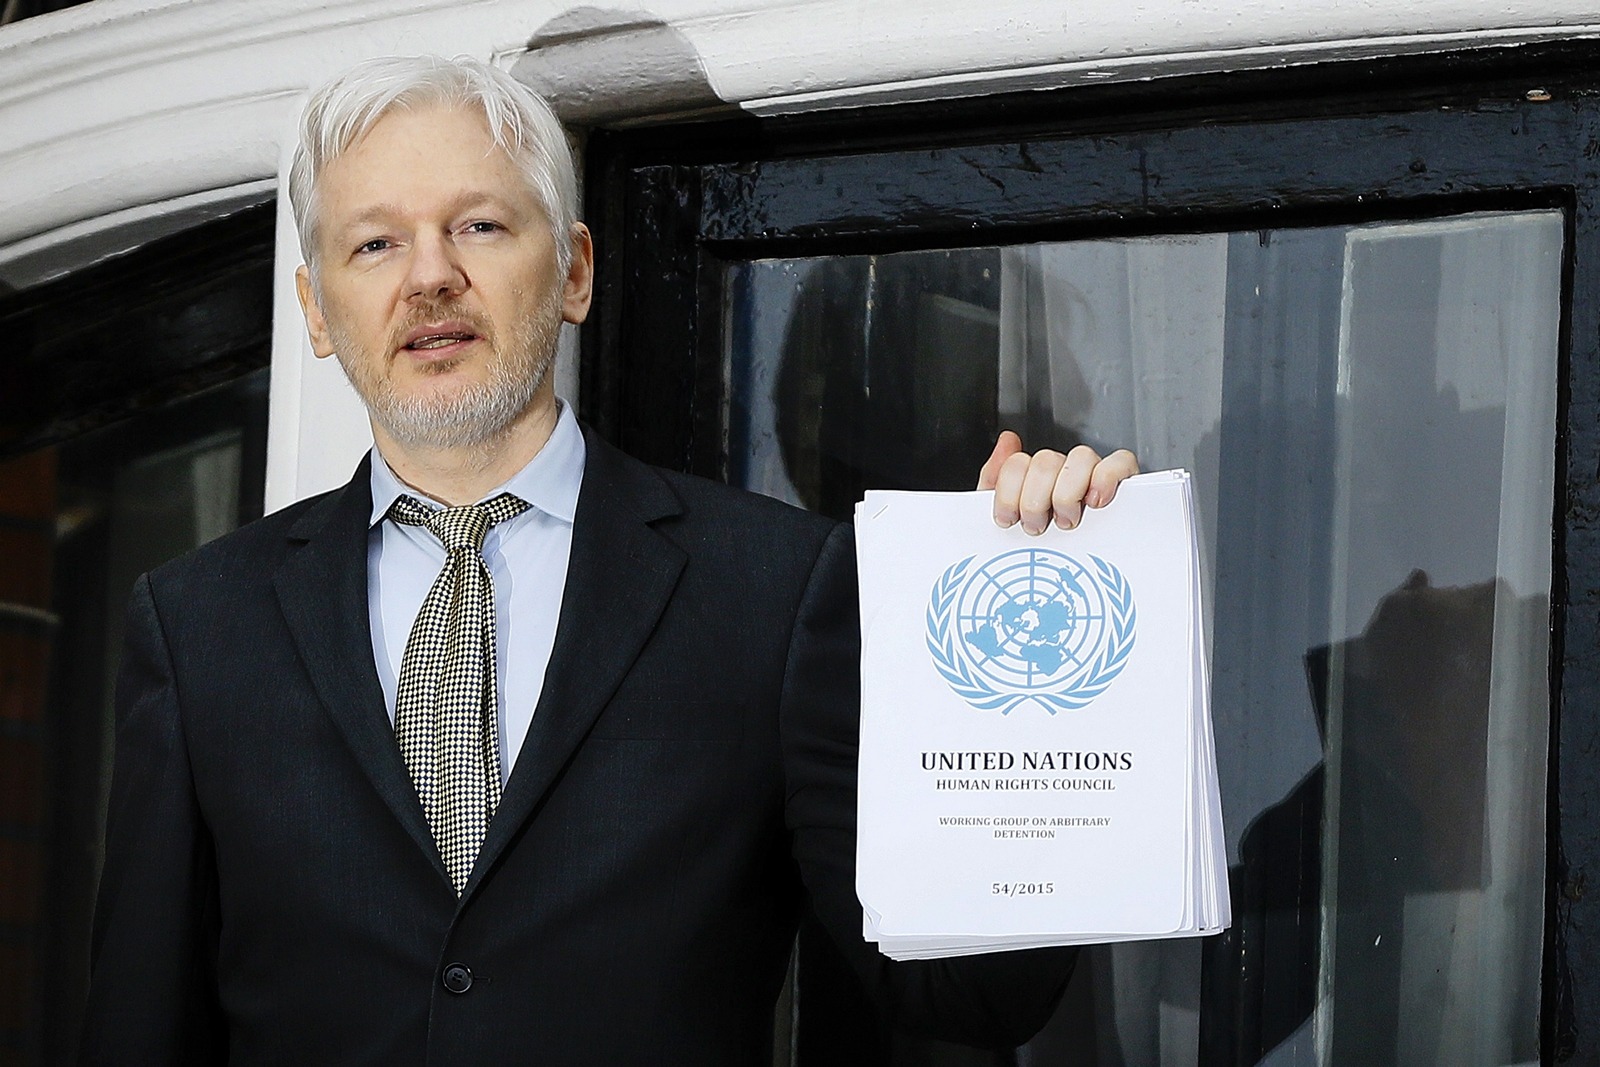 Whistleblower Julian Assange freed from UK prison after striking plea deal with US